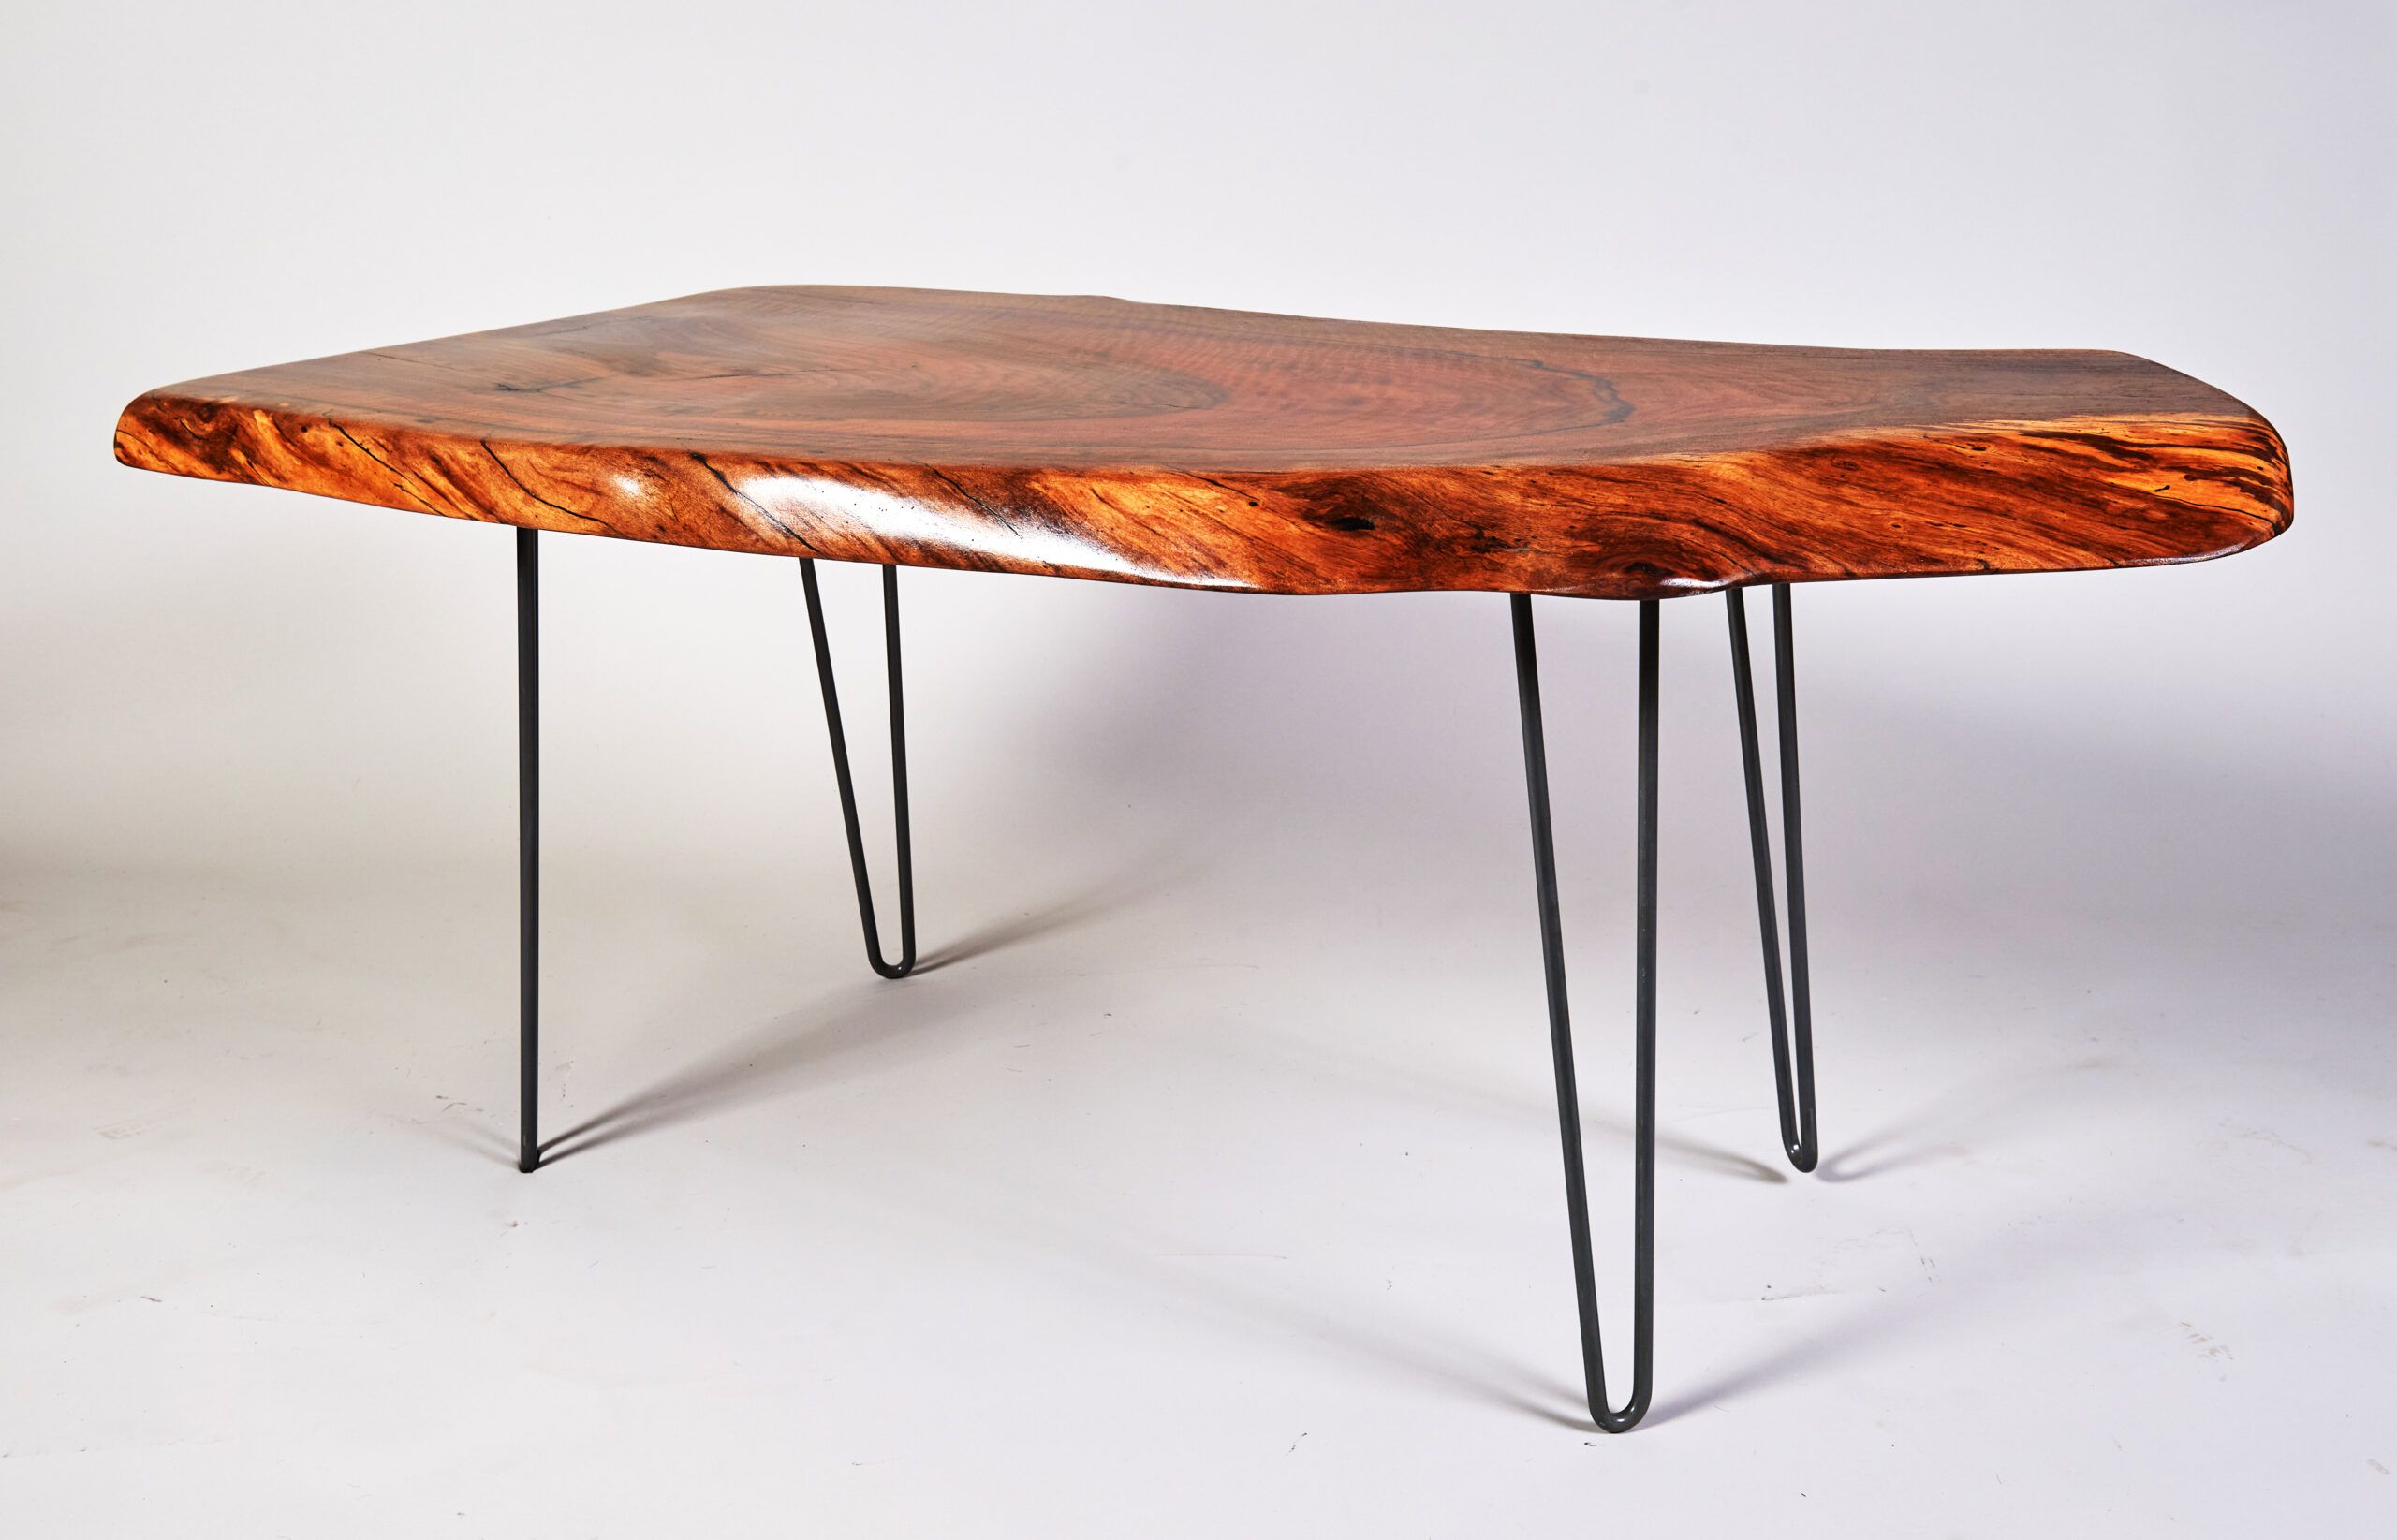 Natural Black Walnut Live Edge Coffee Table [collection 2021] With Regard To Walnut Coffee Tables (View 14 of 15)